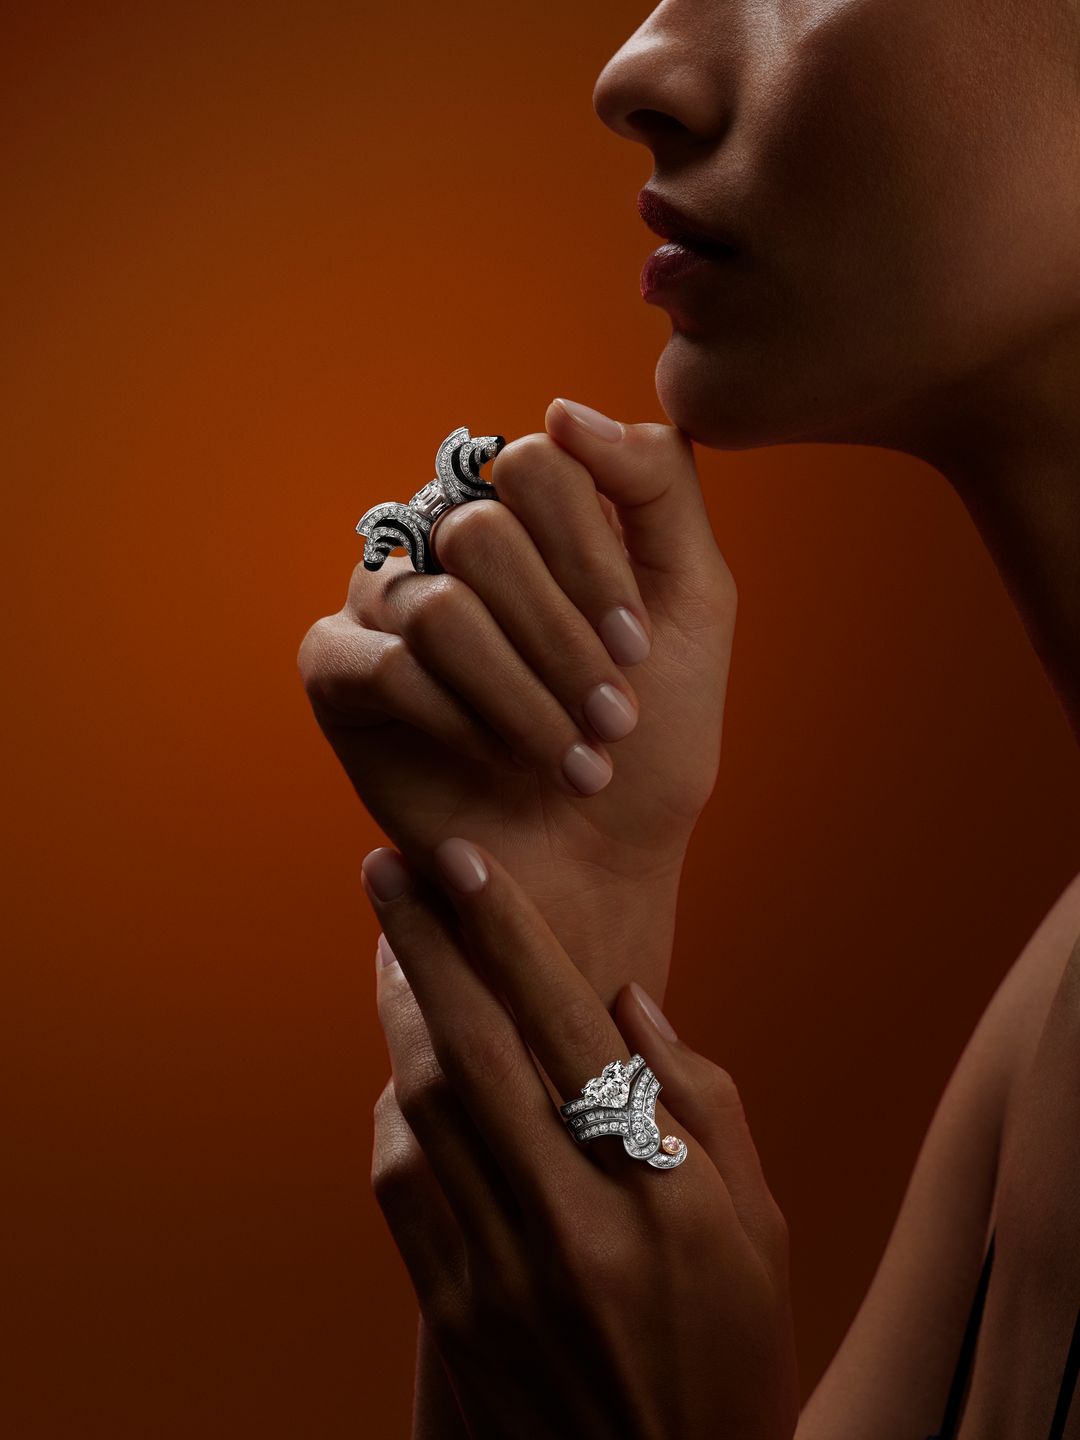 The Zebra Jacket Ring and Elephant Crown Ring from the 'Forces of Nature' collection